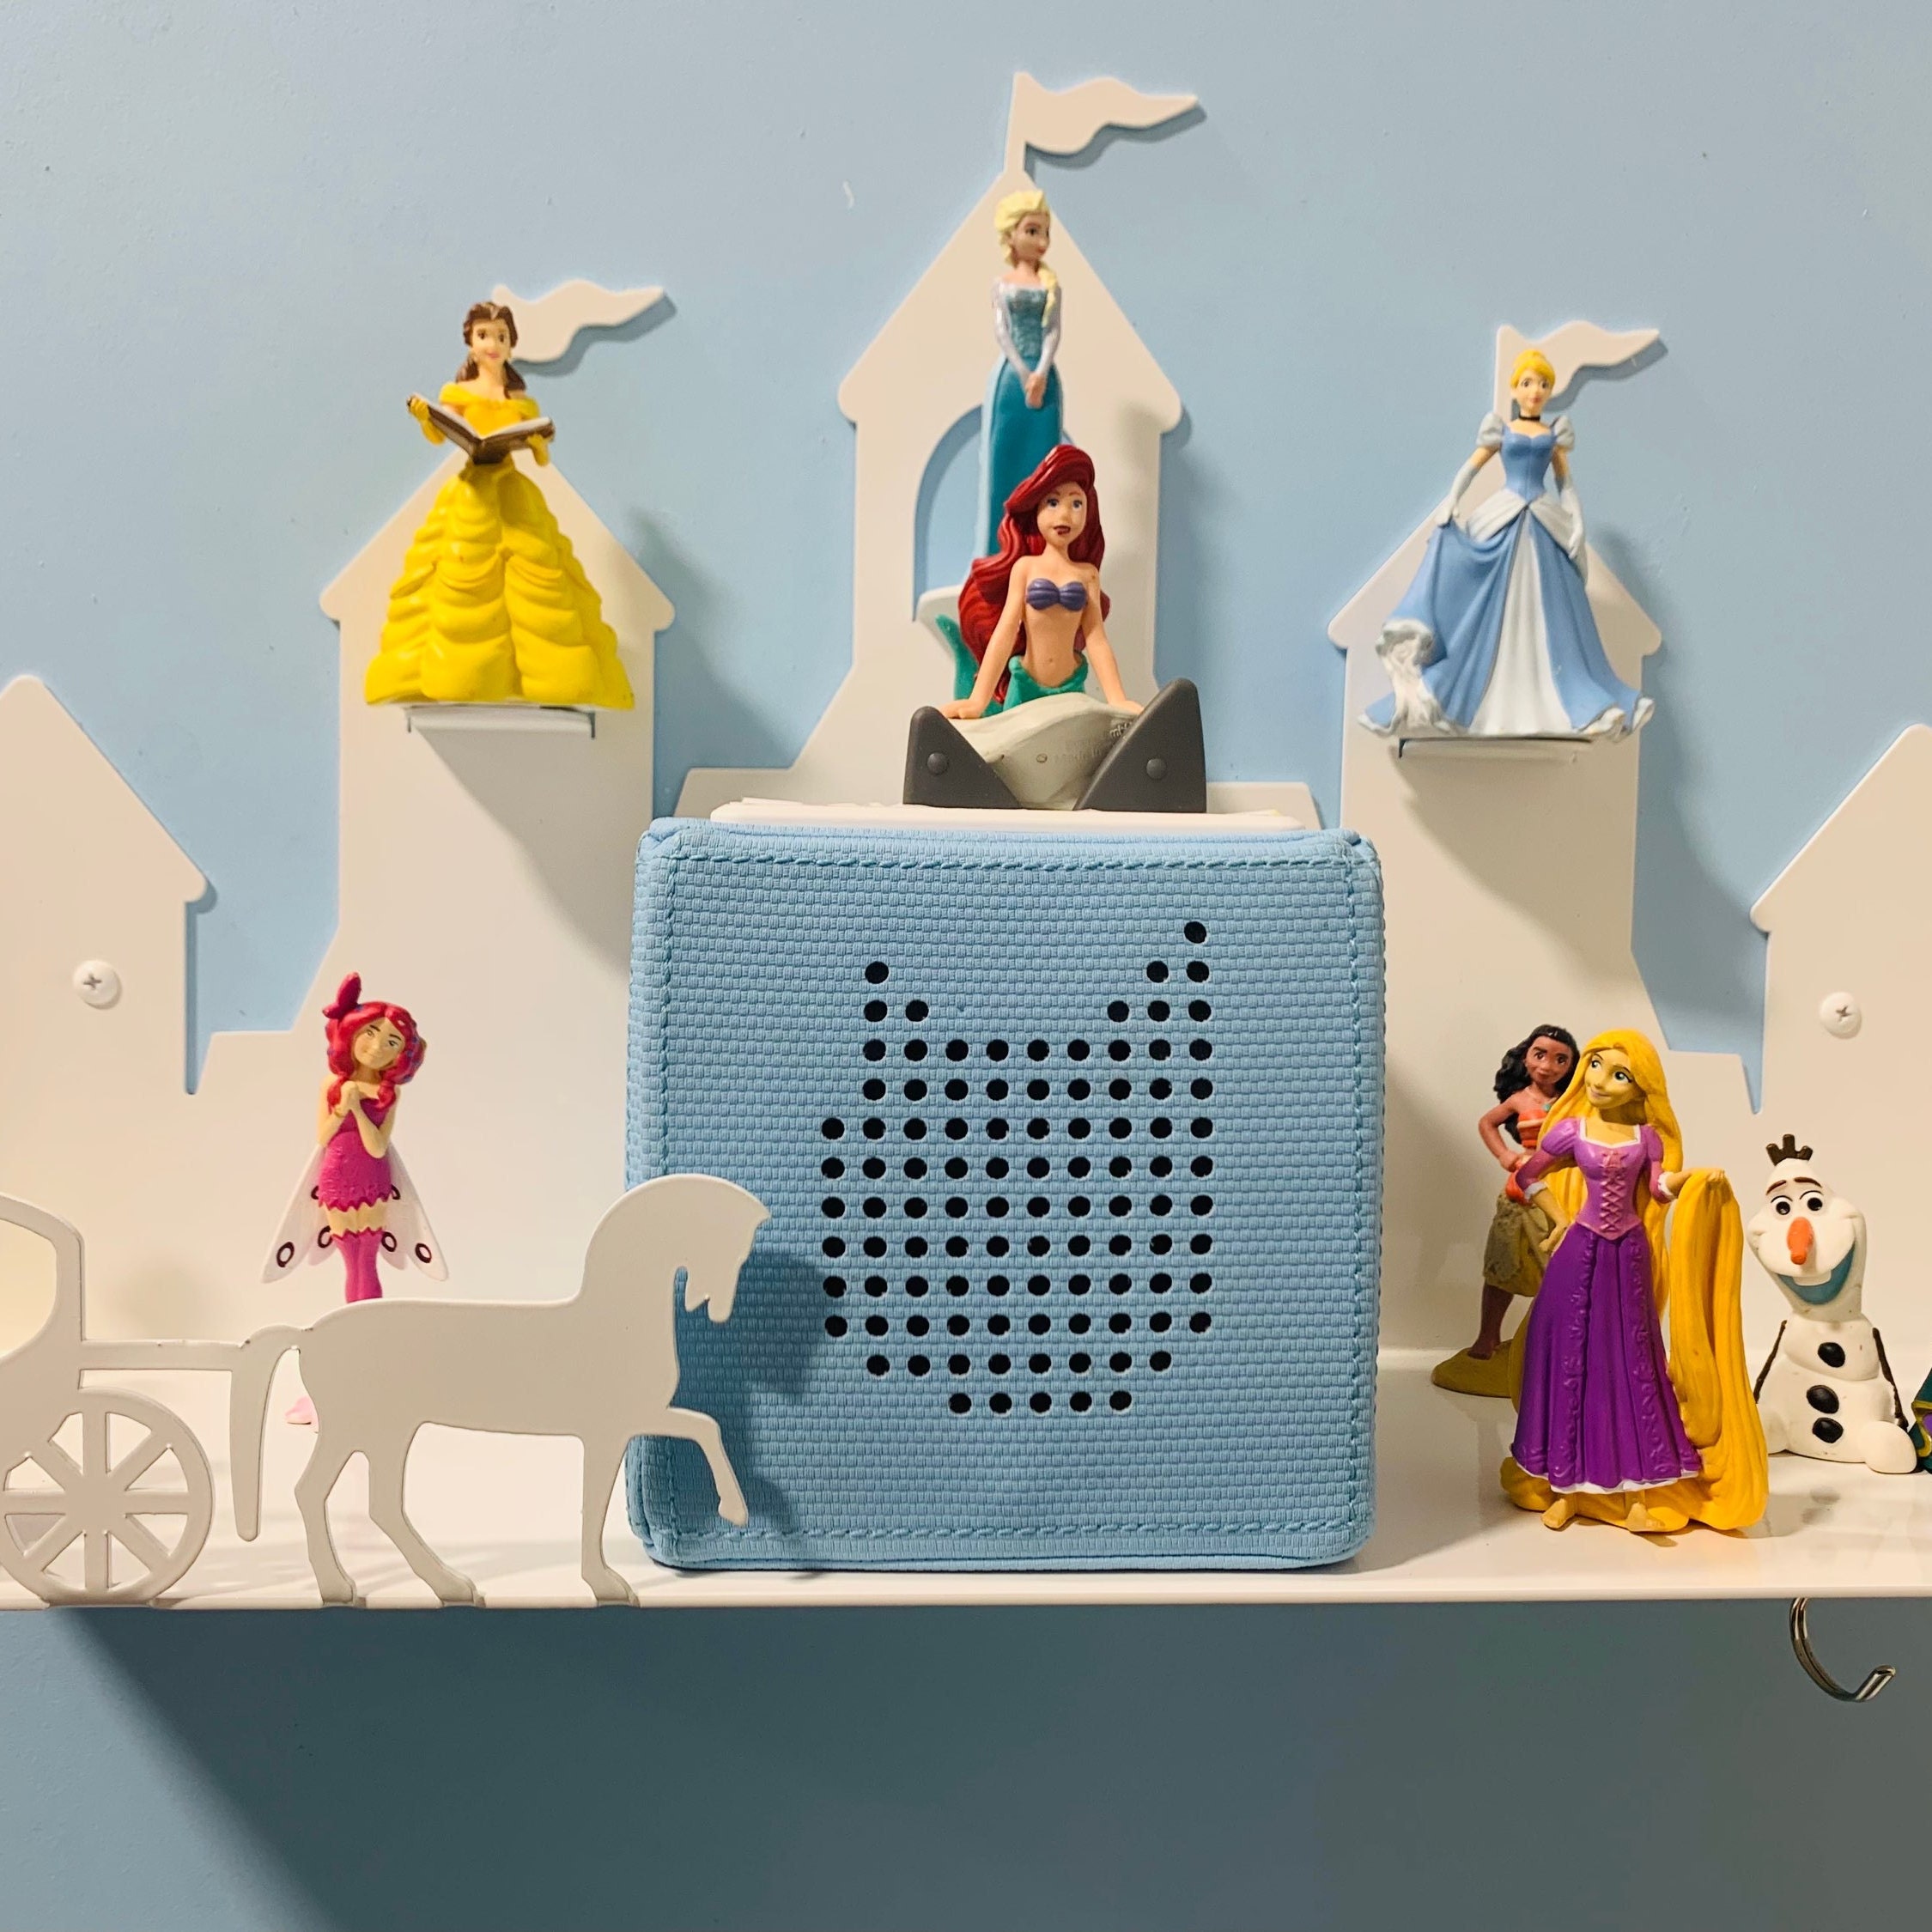 Cinderella Magnetic Paper Doll (Sold Out - Restock Notification